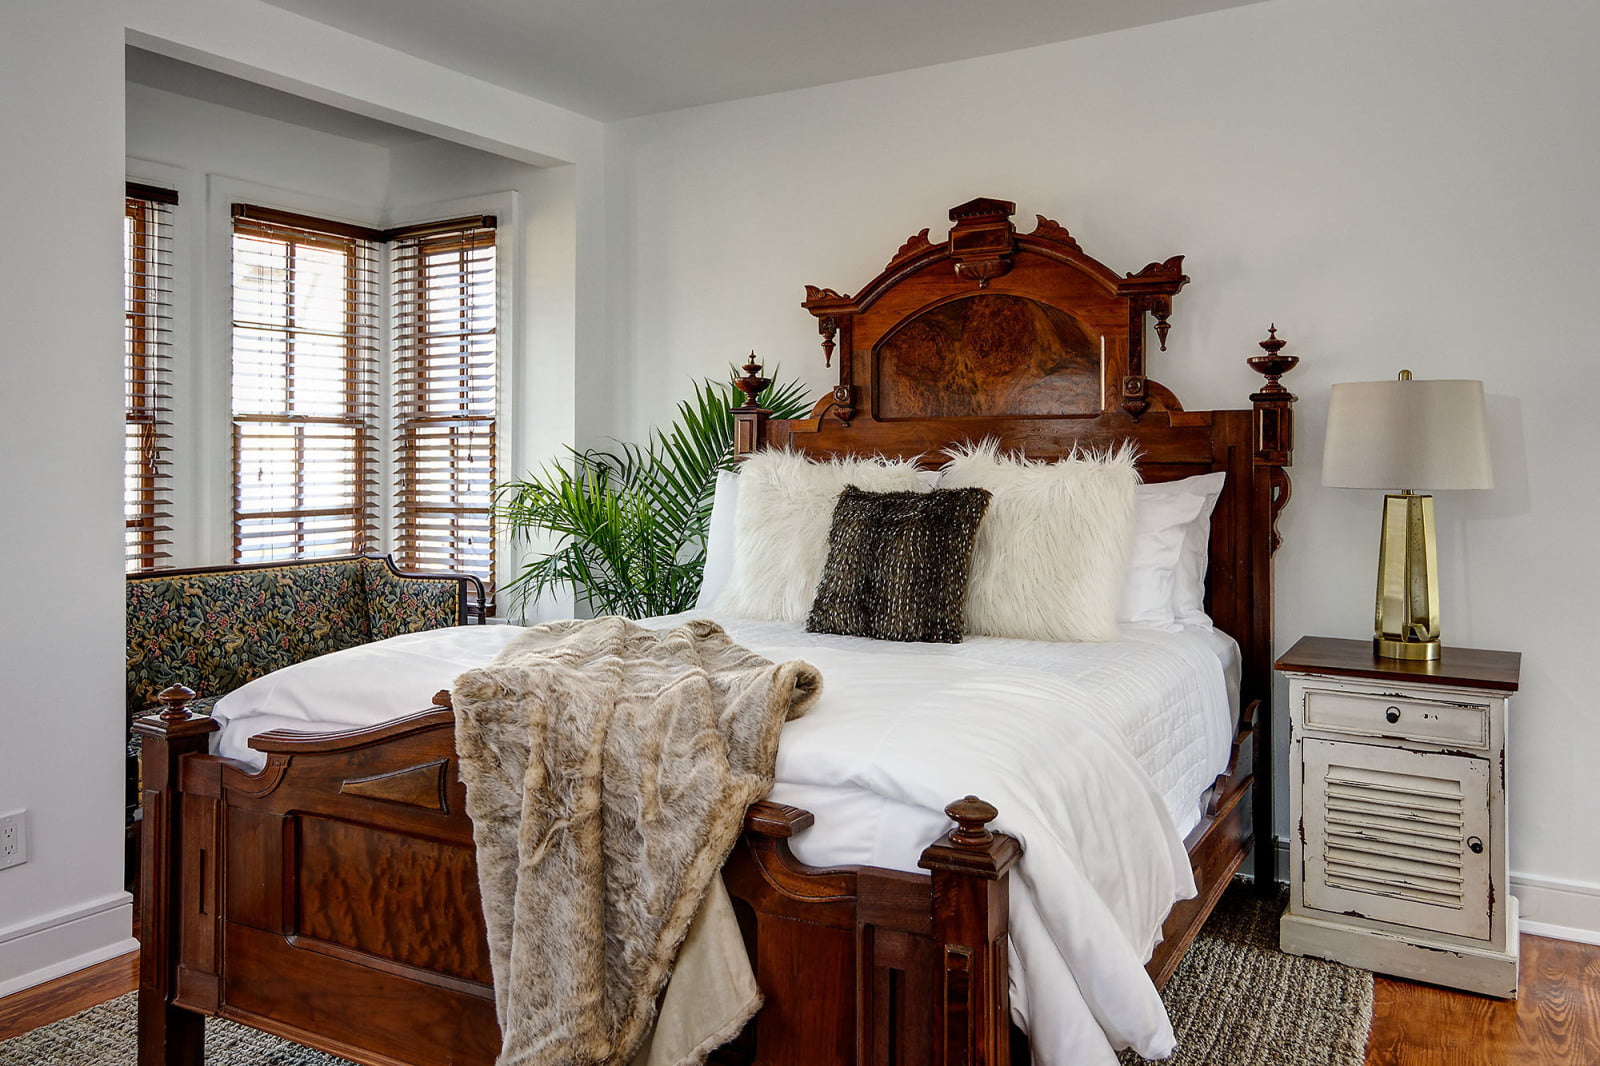 With natural wood décor white linens and greenery beautiful lighting jute rug over hardwood floors and many other amenities a stay in the elegant and sophisticated White Ginger room will set the backdrop for relaxation and romance